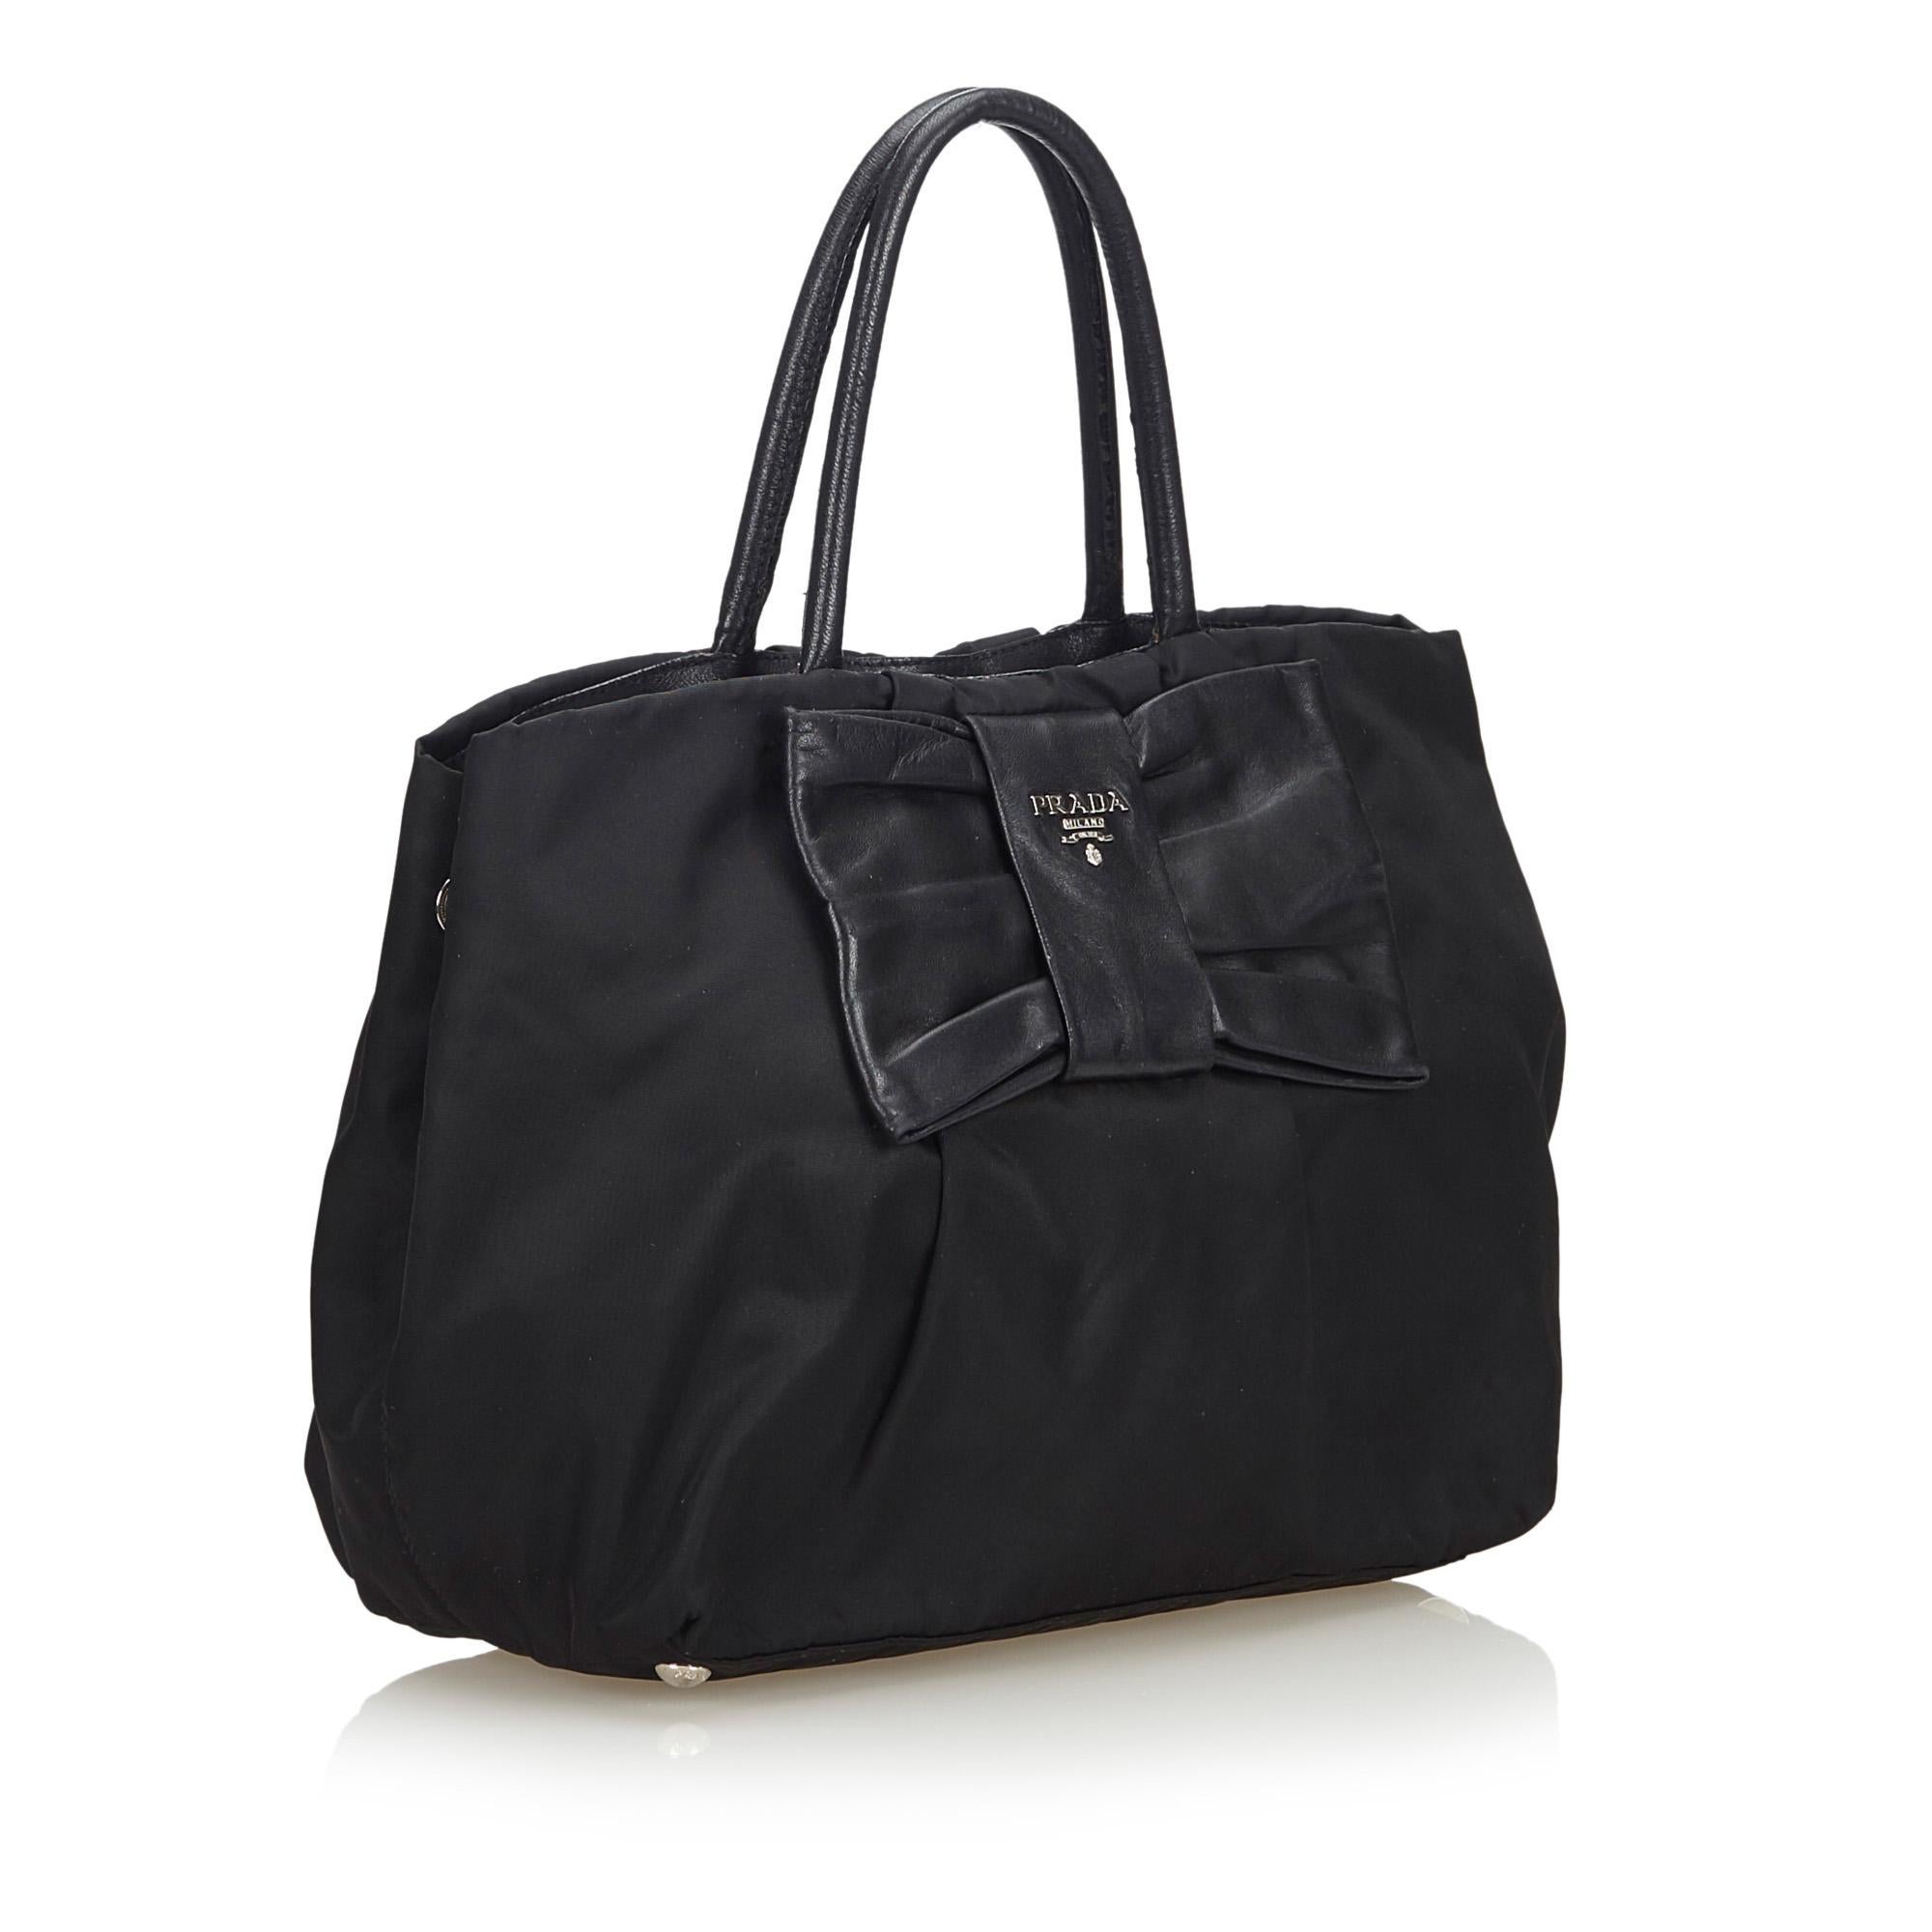 This handbag features a nylon body with a leather ribbon detail, rolled leather handles, an open top with a magnetic snap button closure, and an interior zip pocket. It carries as B+ condition rating.

Inclusions: 
This item does not come with